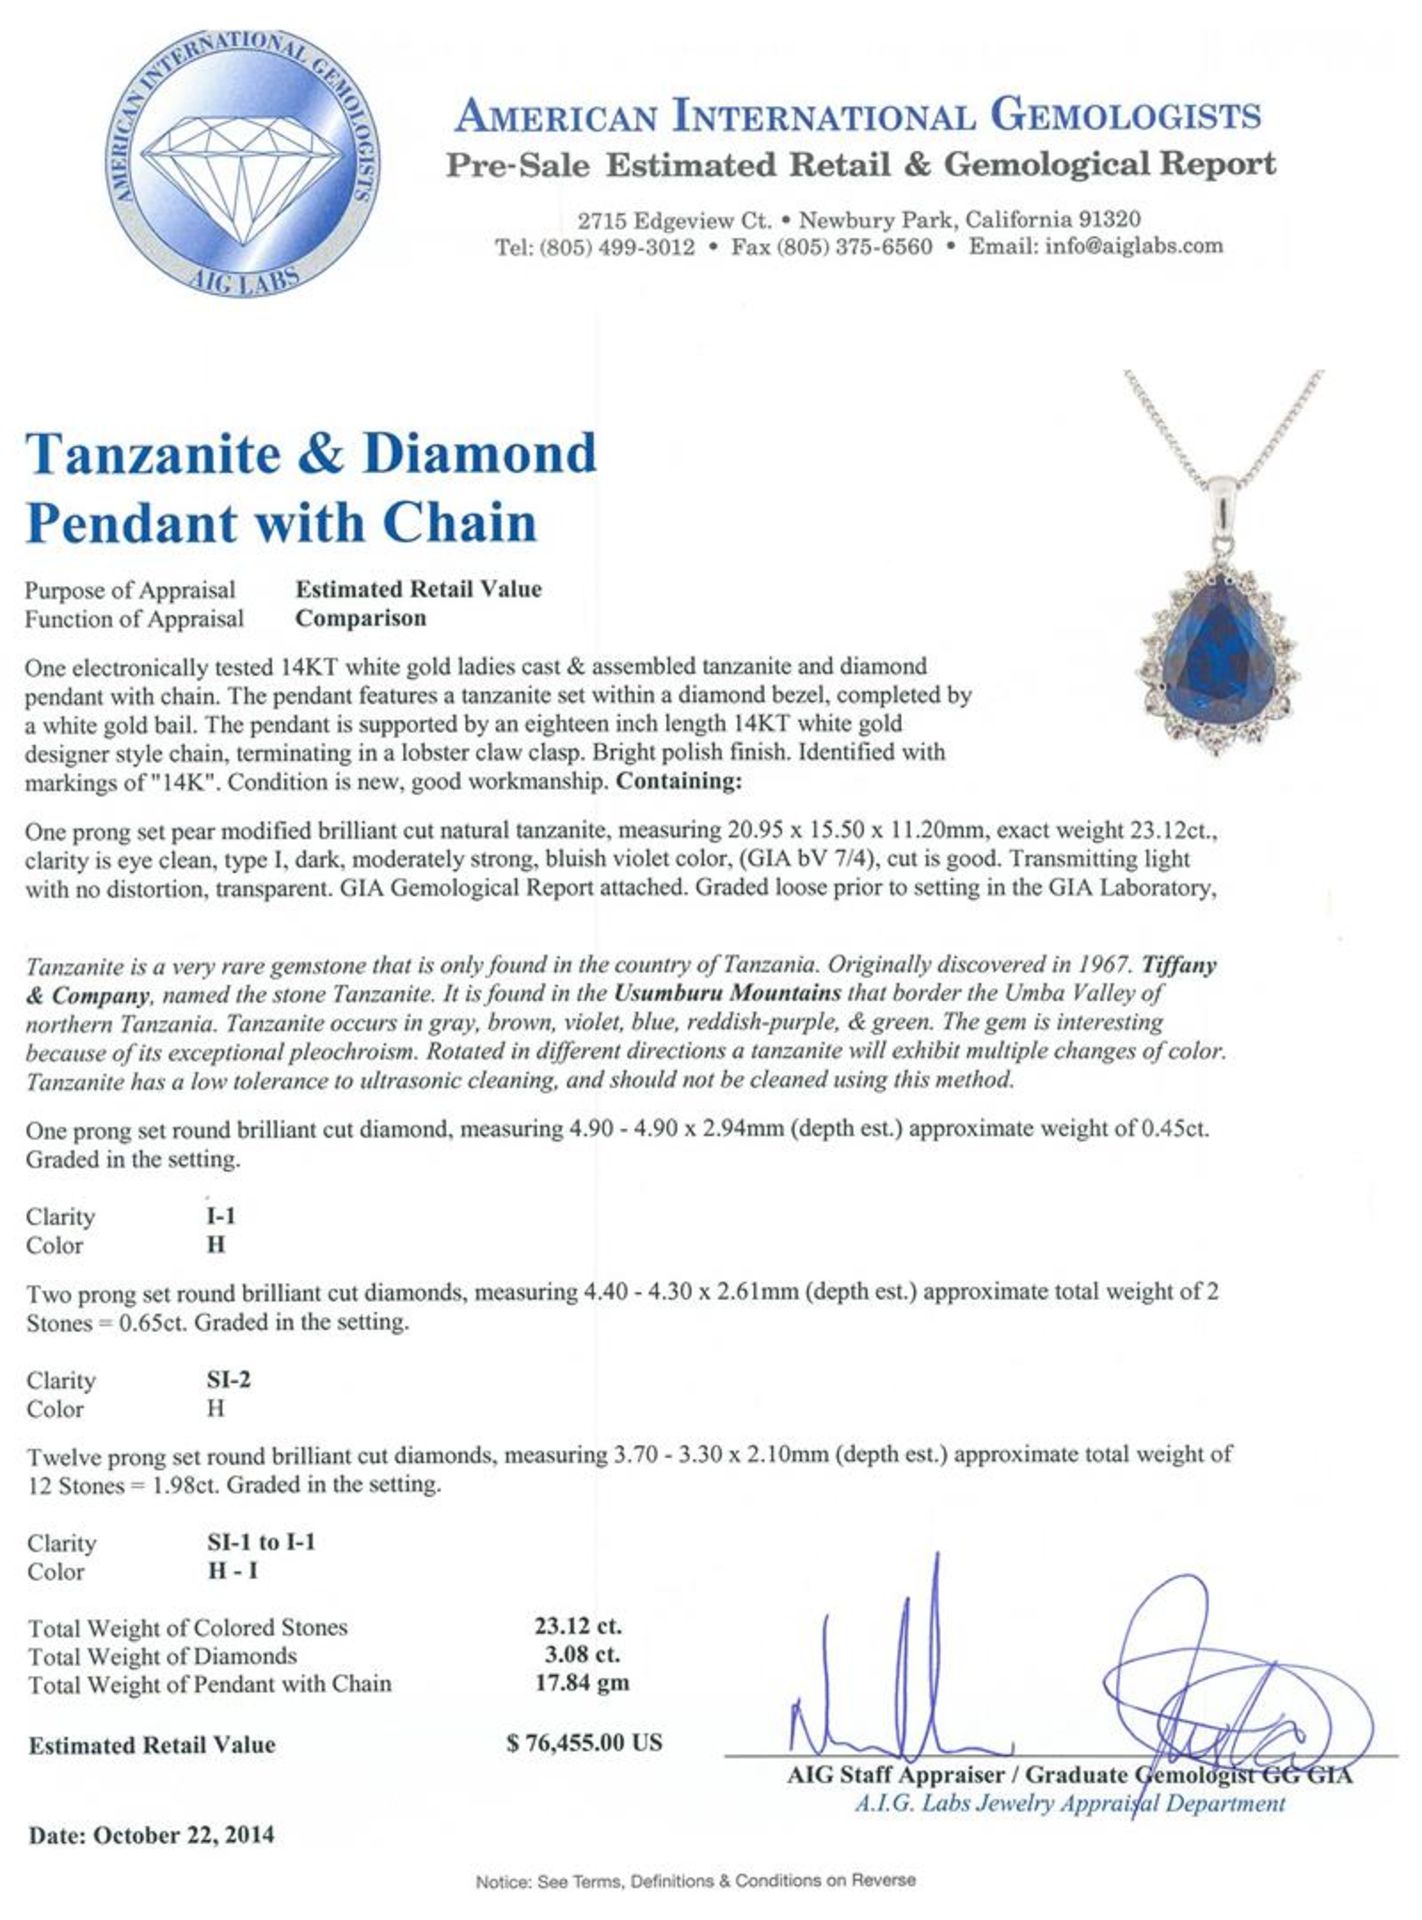 14KT White Gold GIA Certified 23.12 ctw Tanzanite and Diamond Pendant With Chain - Image 4 of 5